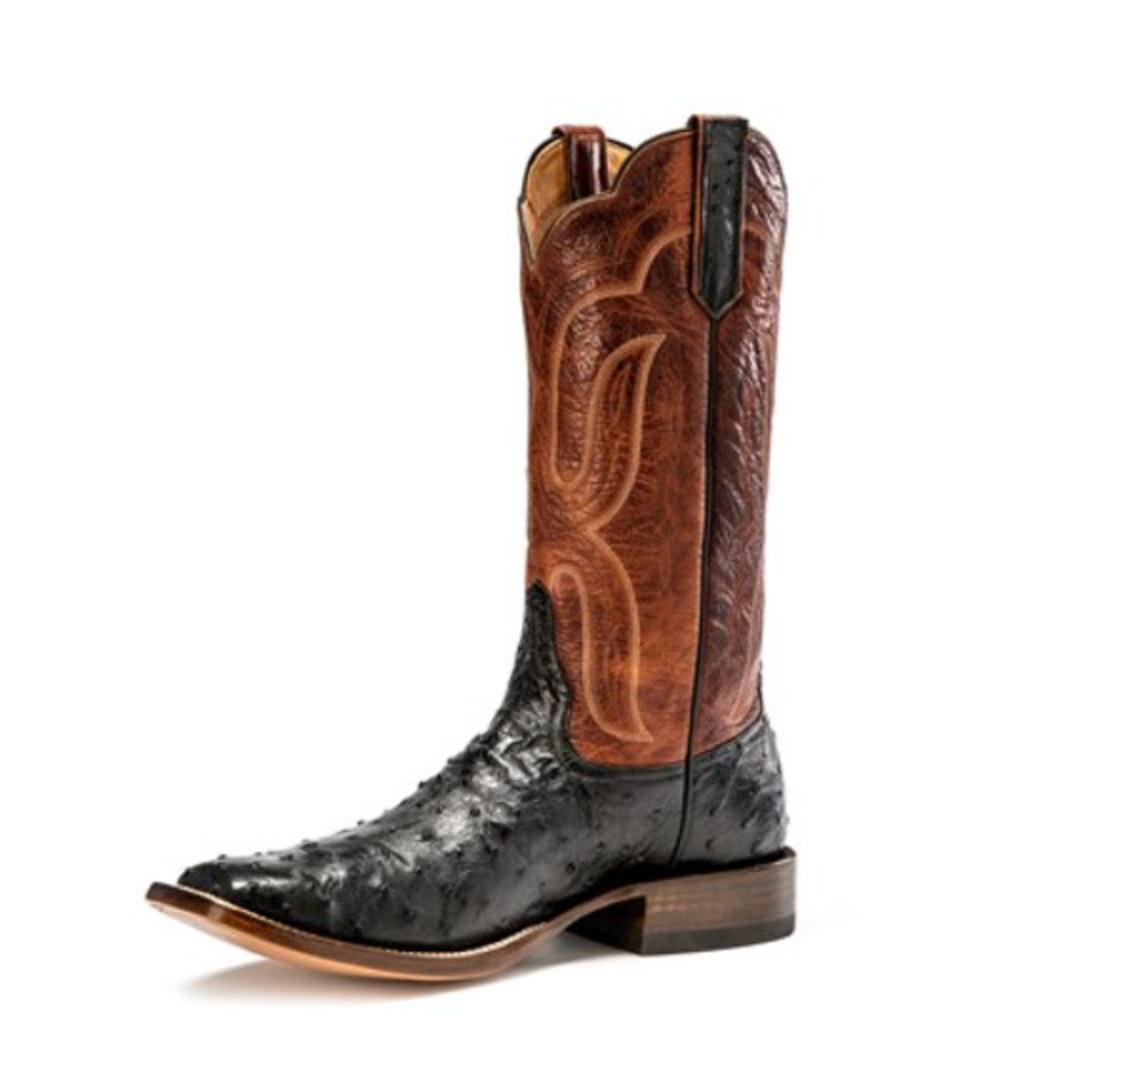 Full Quill Ostrich Boots